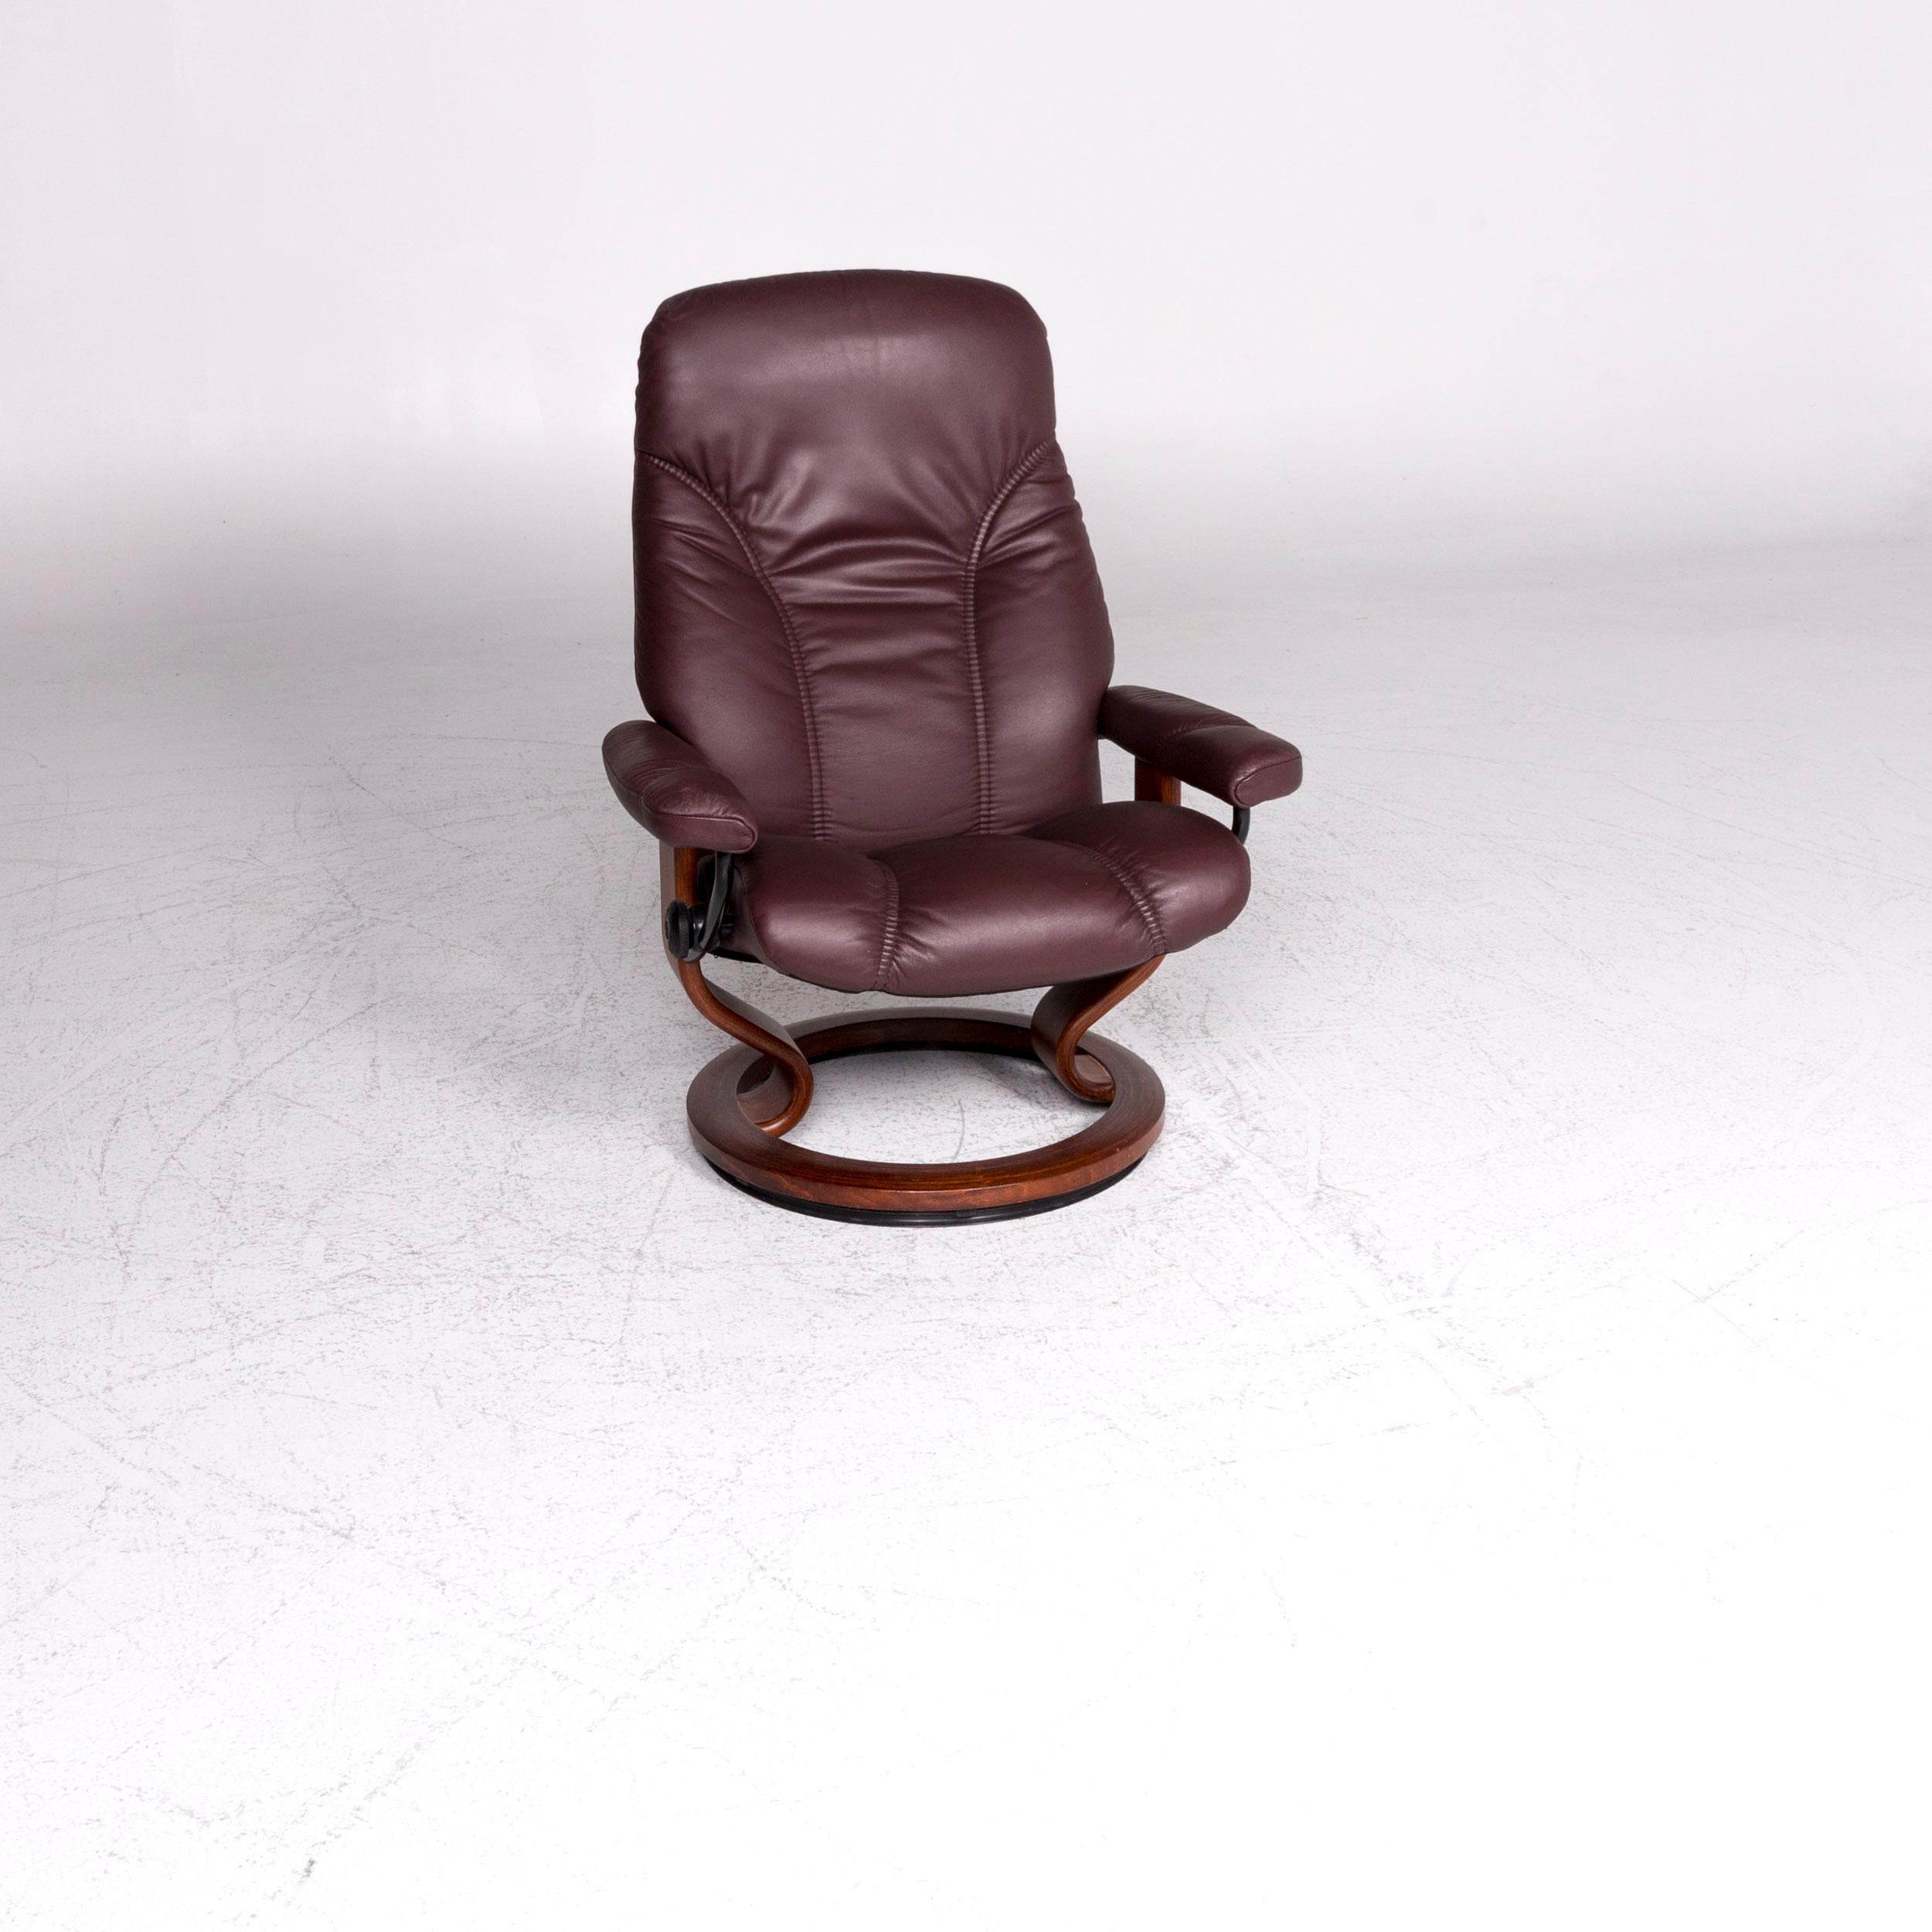 Modern Stressless Consul Leather Armchair Stool Red-Brown Relax Function